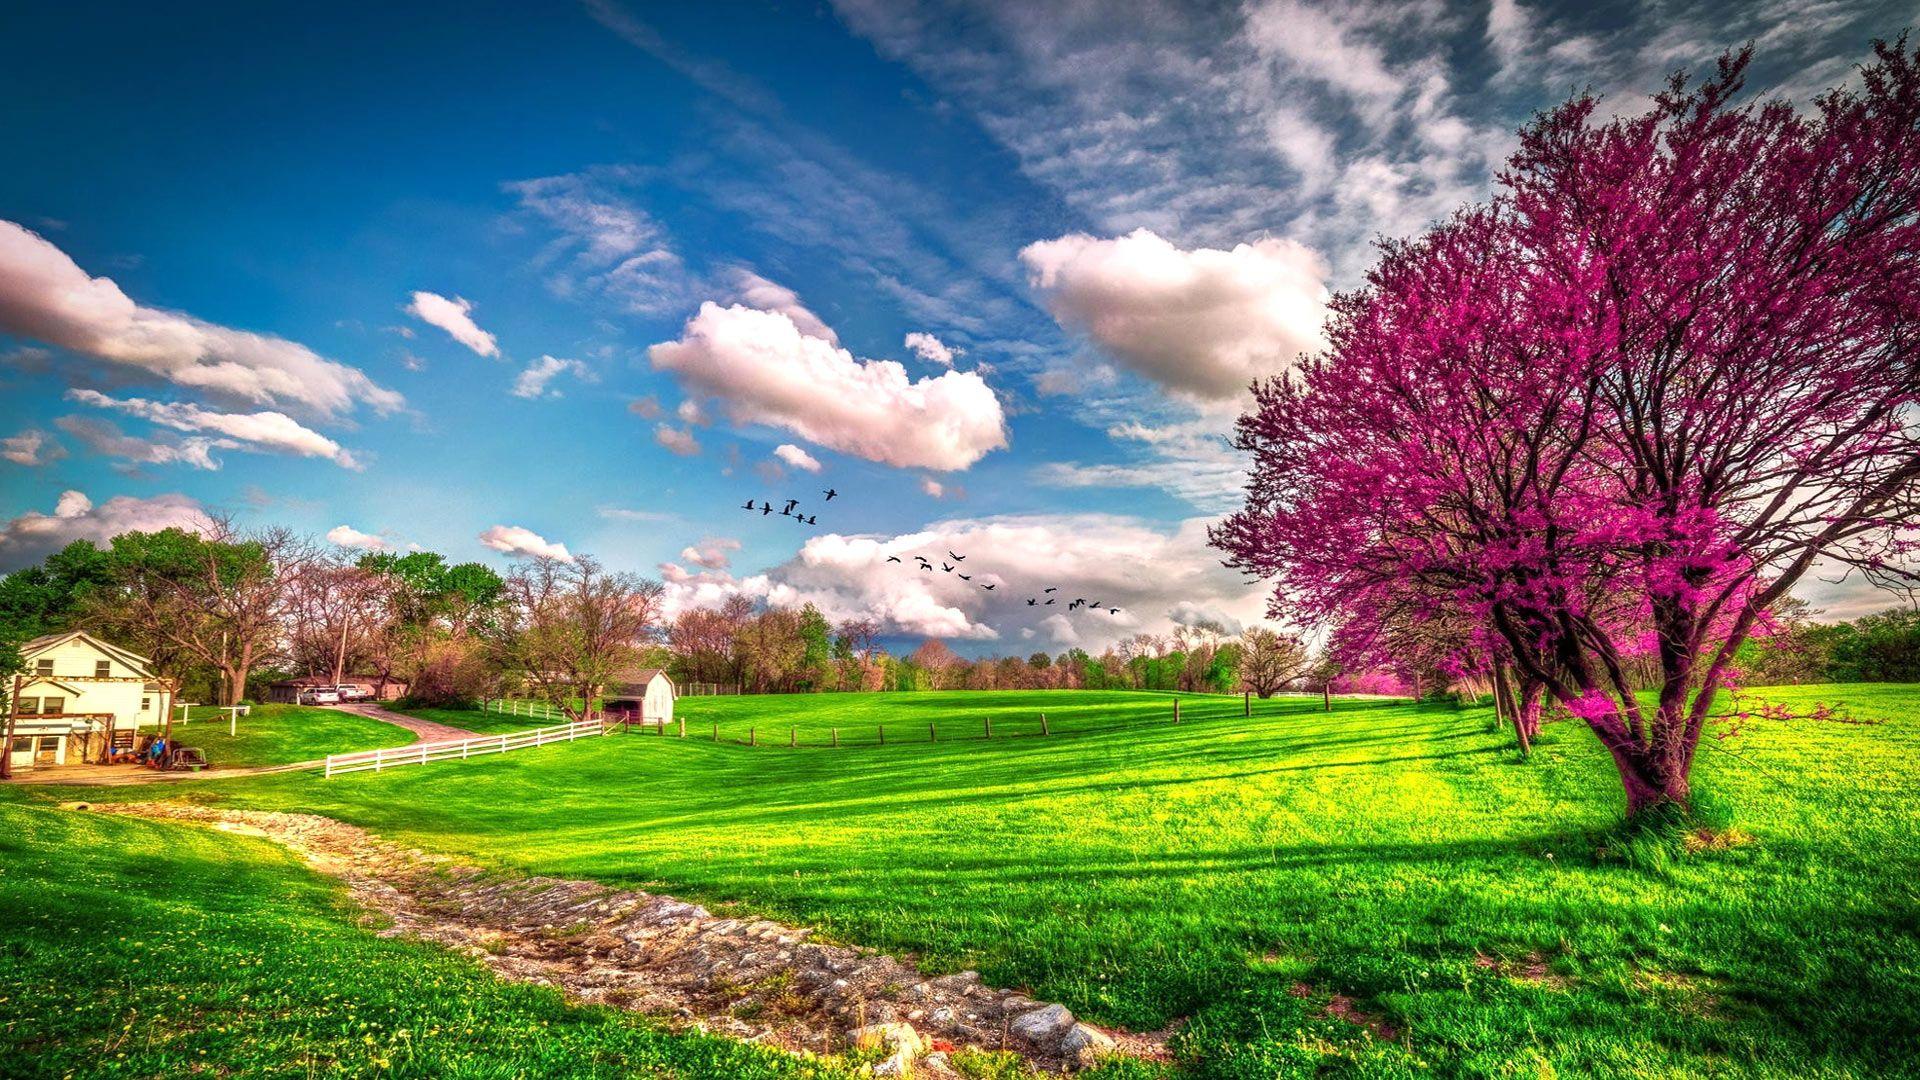 Beautiful spring wallpaper, Picture, Image